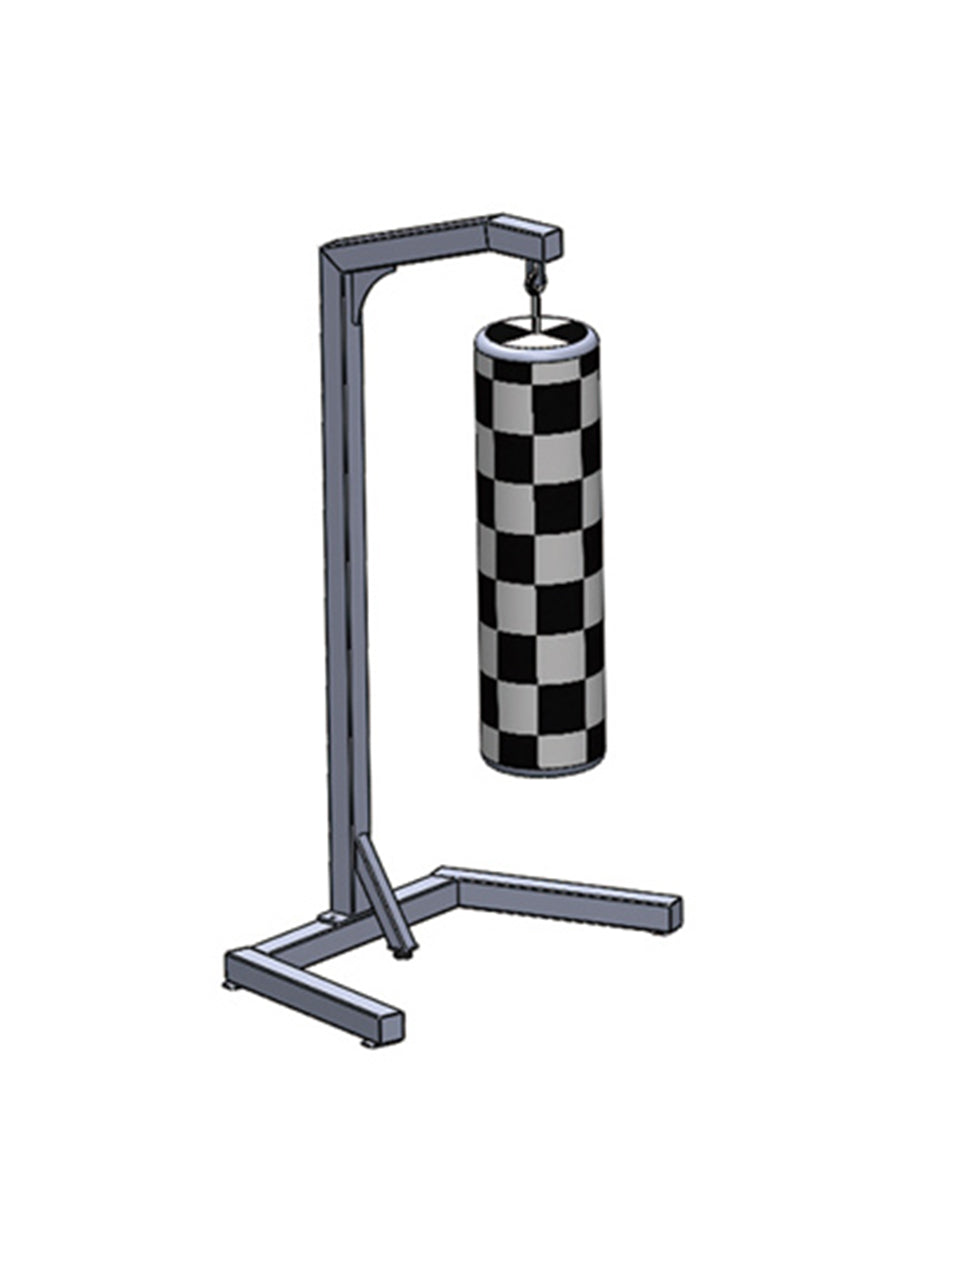 1441 Fitness Punching Bag Stand - 41FC22